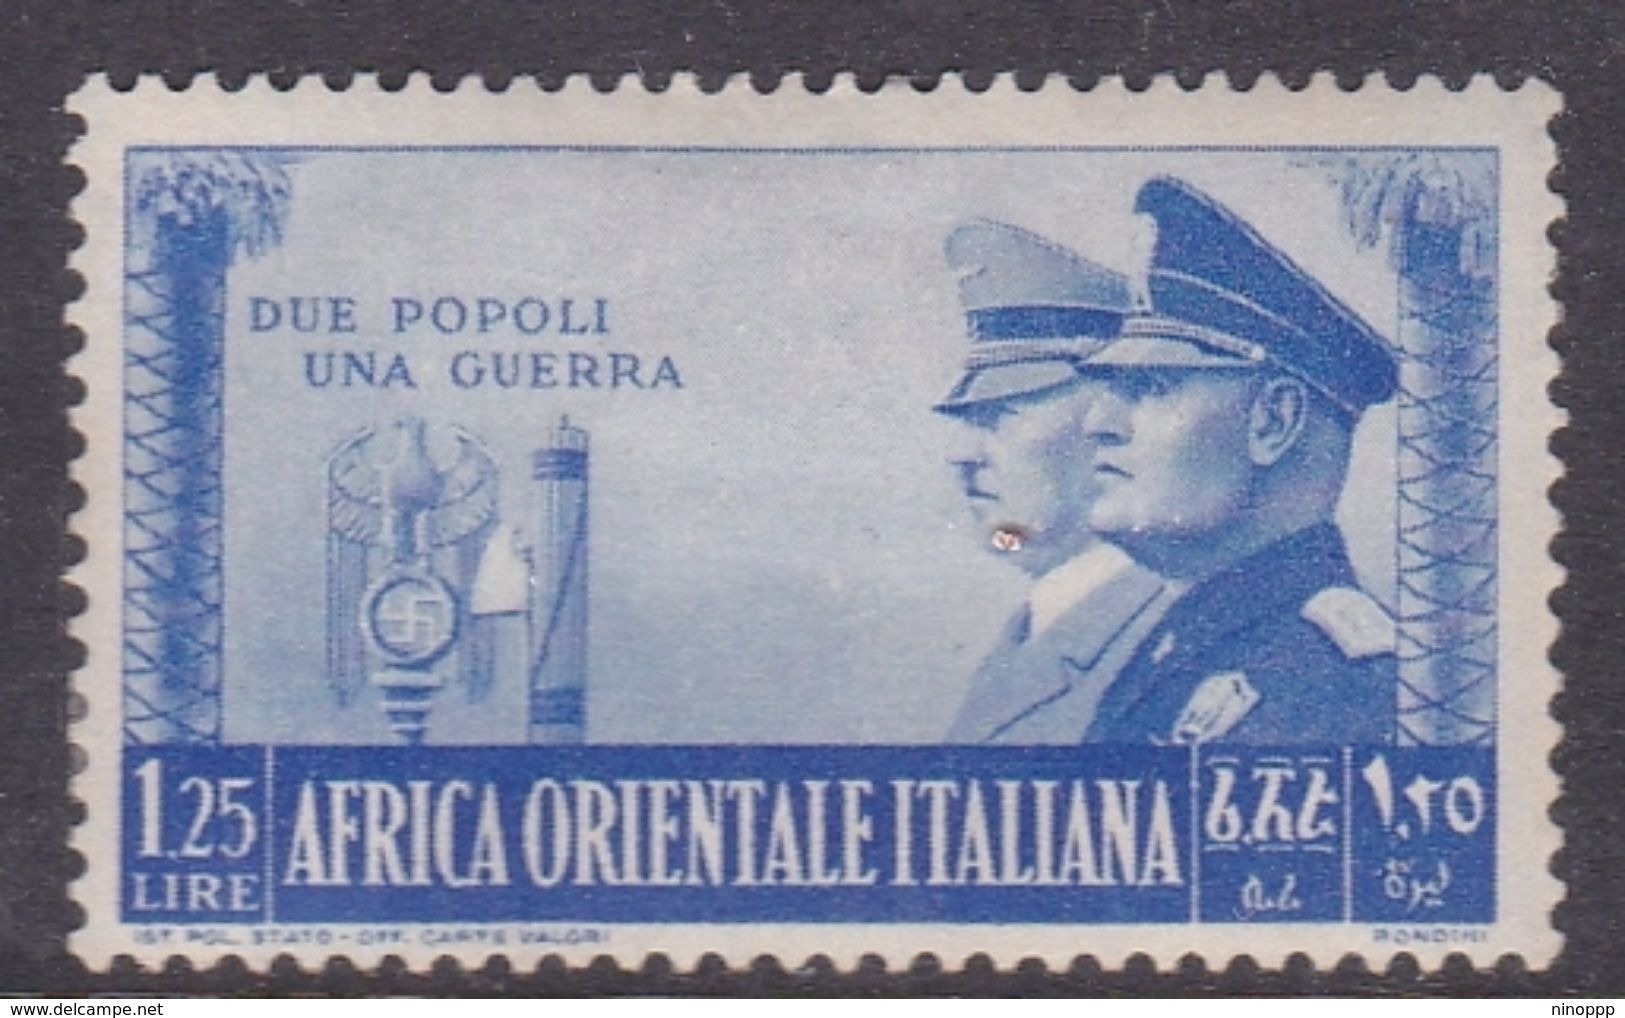 Italy-Colonies And Territories-Italian Eastern Africa S40 1941 Two Peoples One War 1,25 Lira Bright Ultra MH - Amtliche Ausgaben